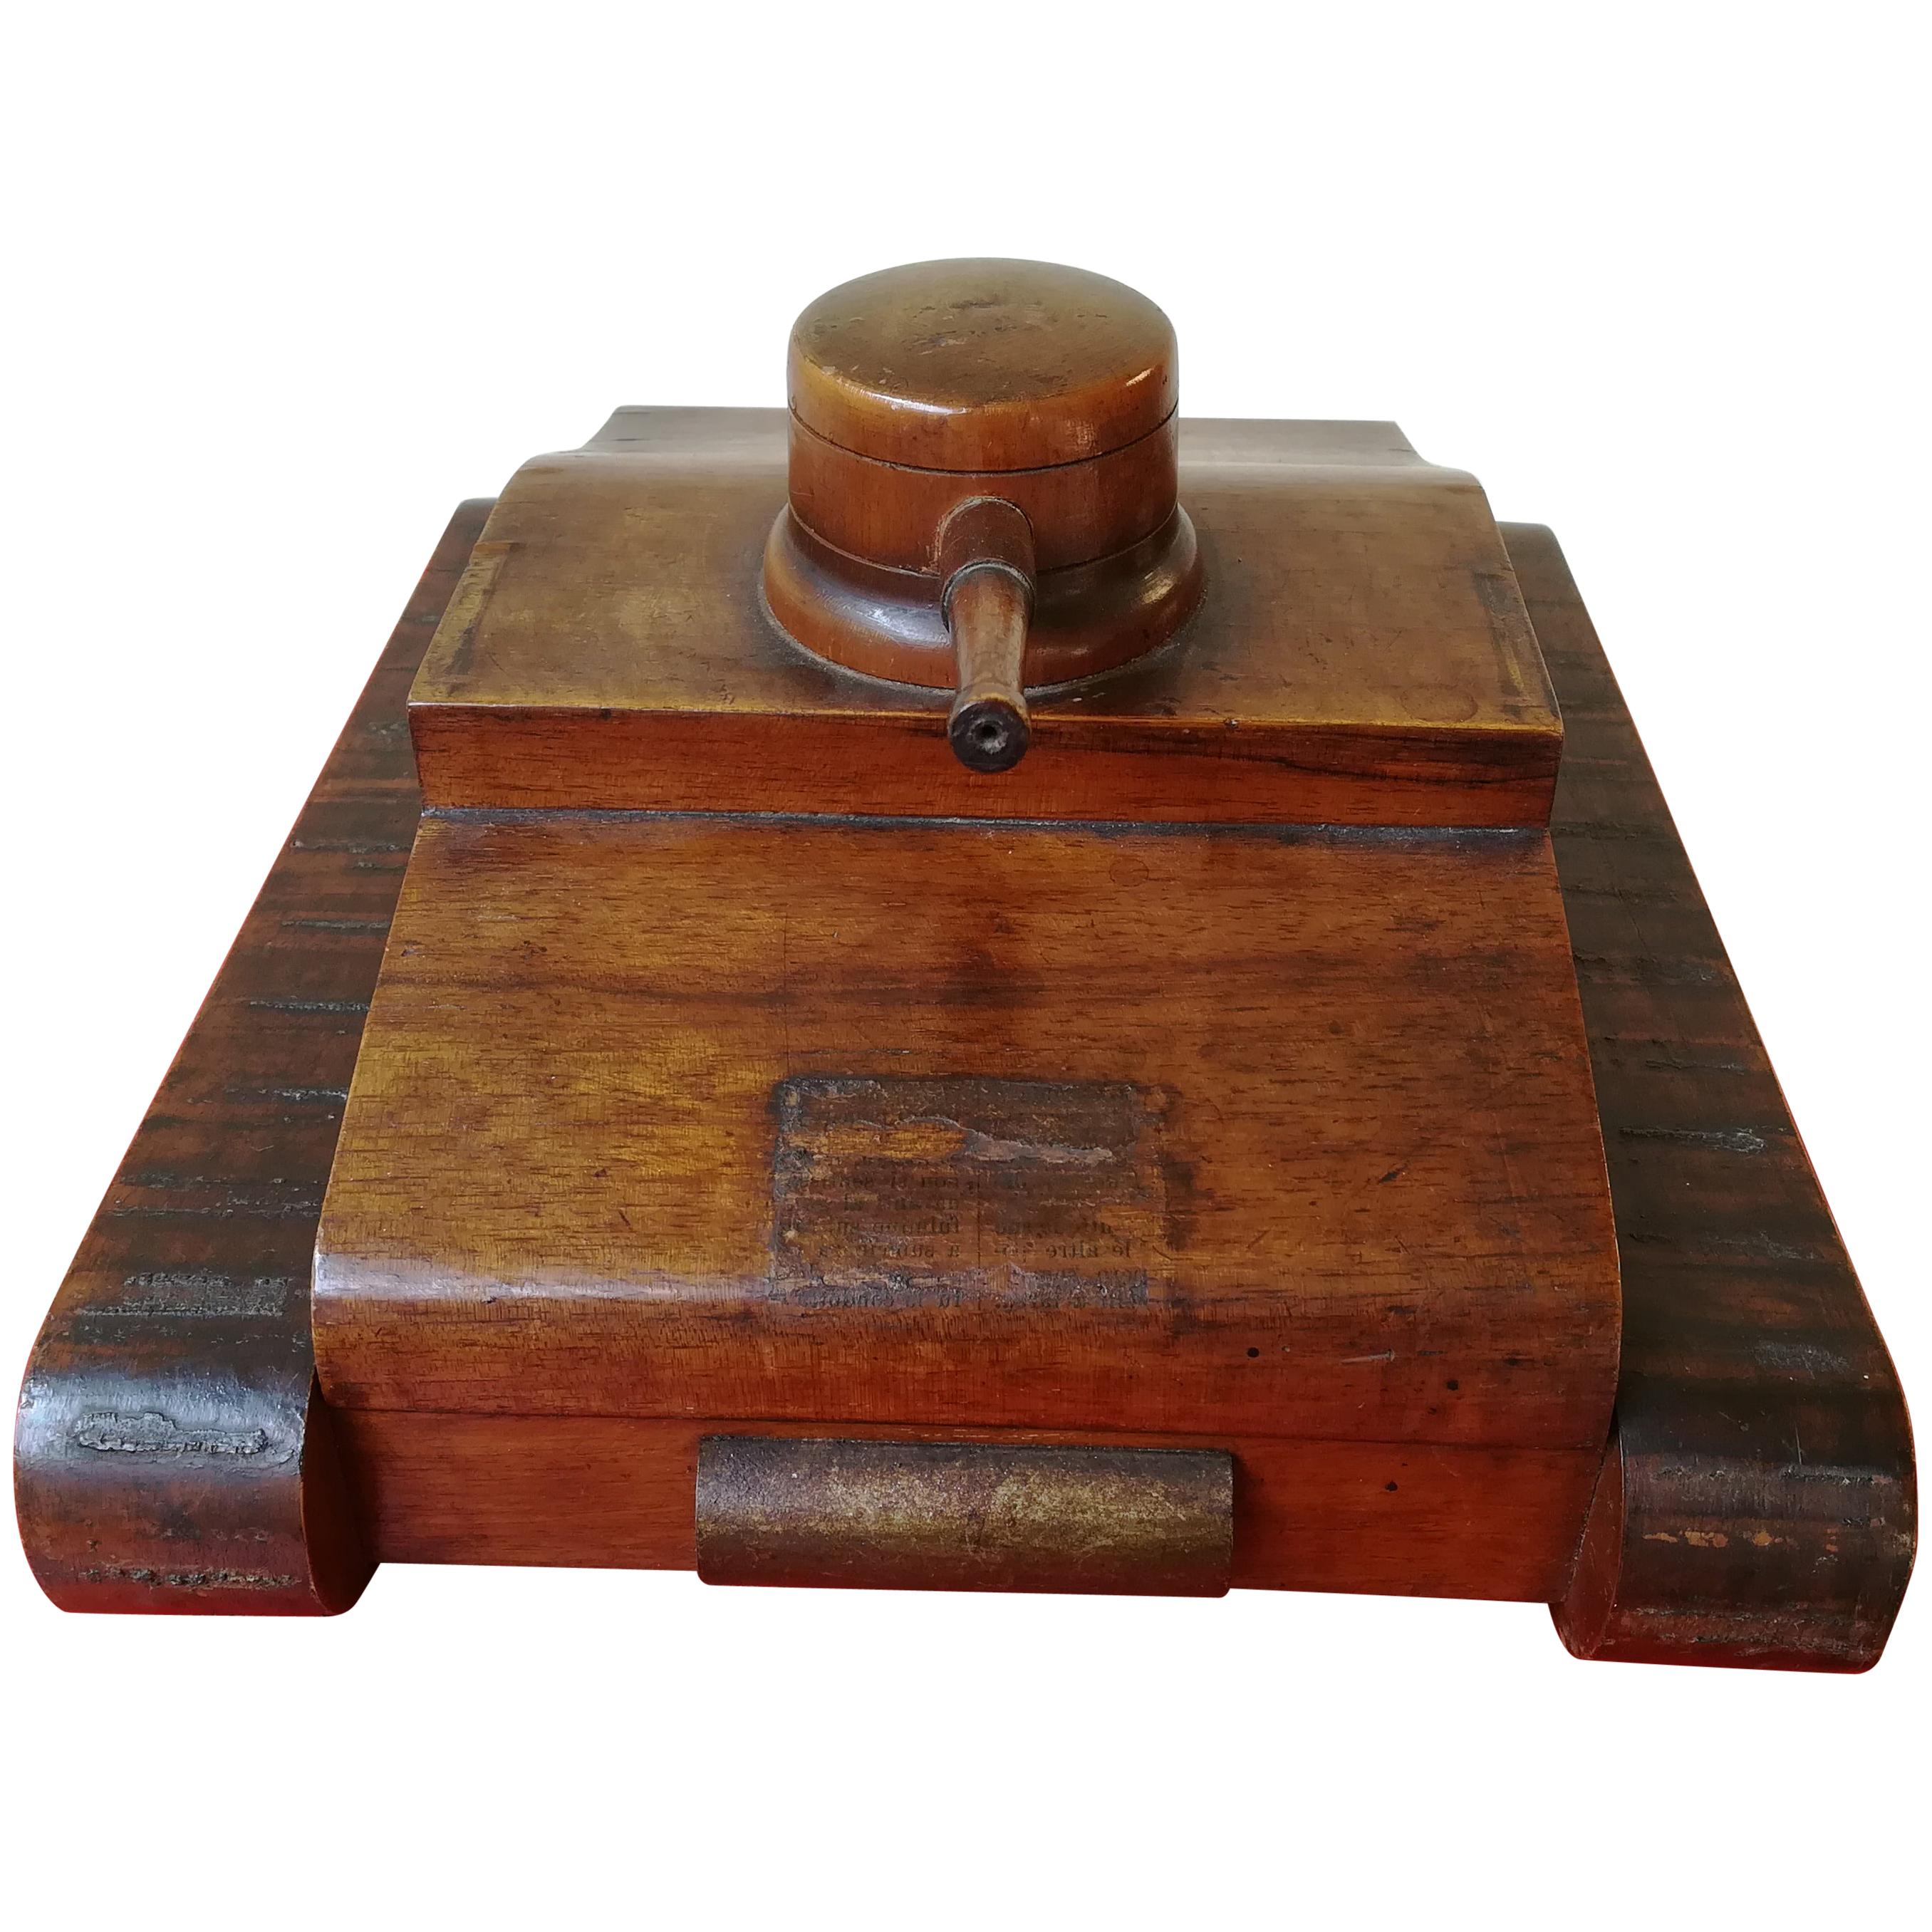 Mid-20th Century Italian Wood Box in a Shape of a Military Tank, 1940 For Sale